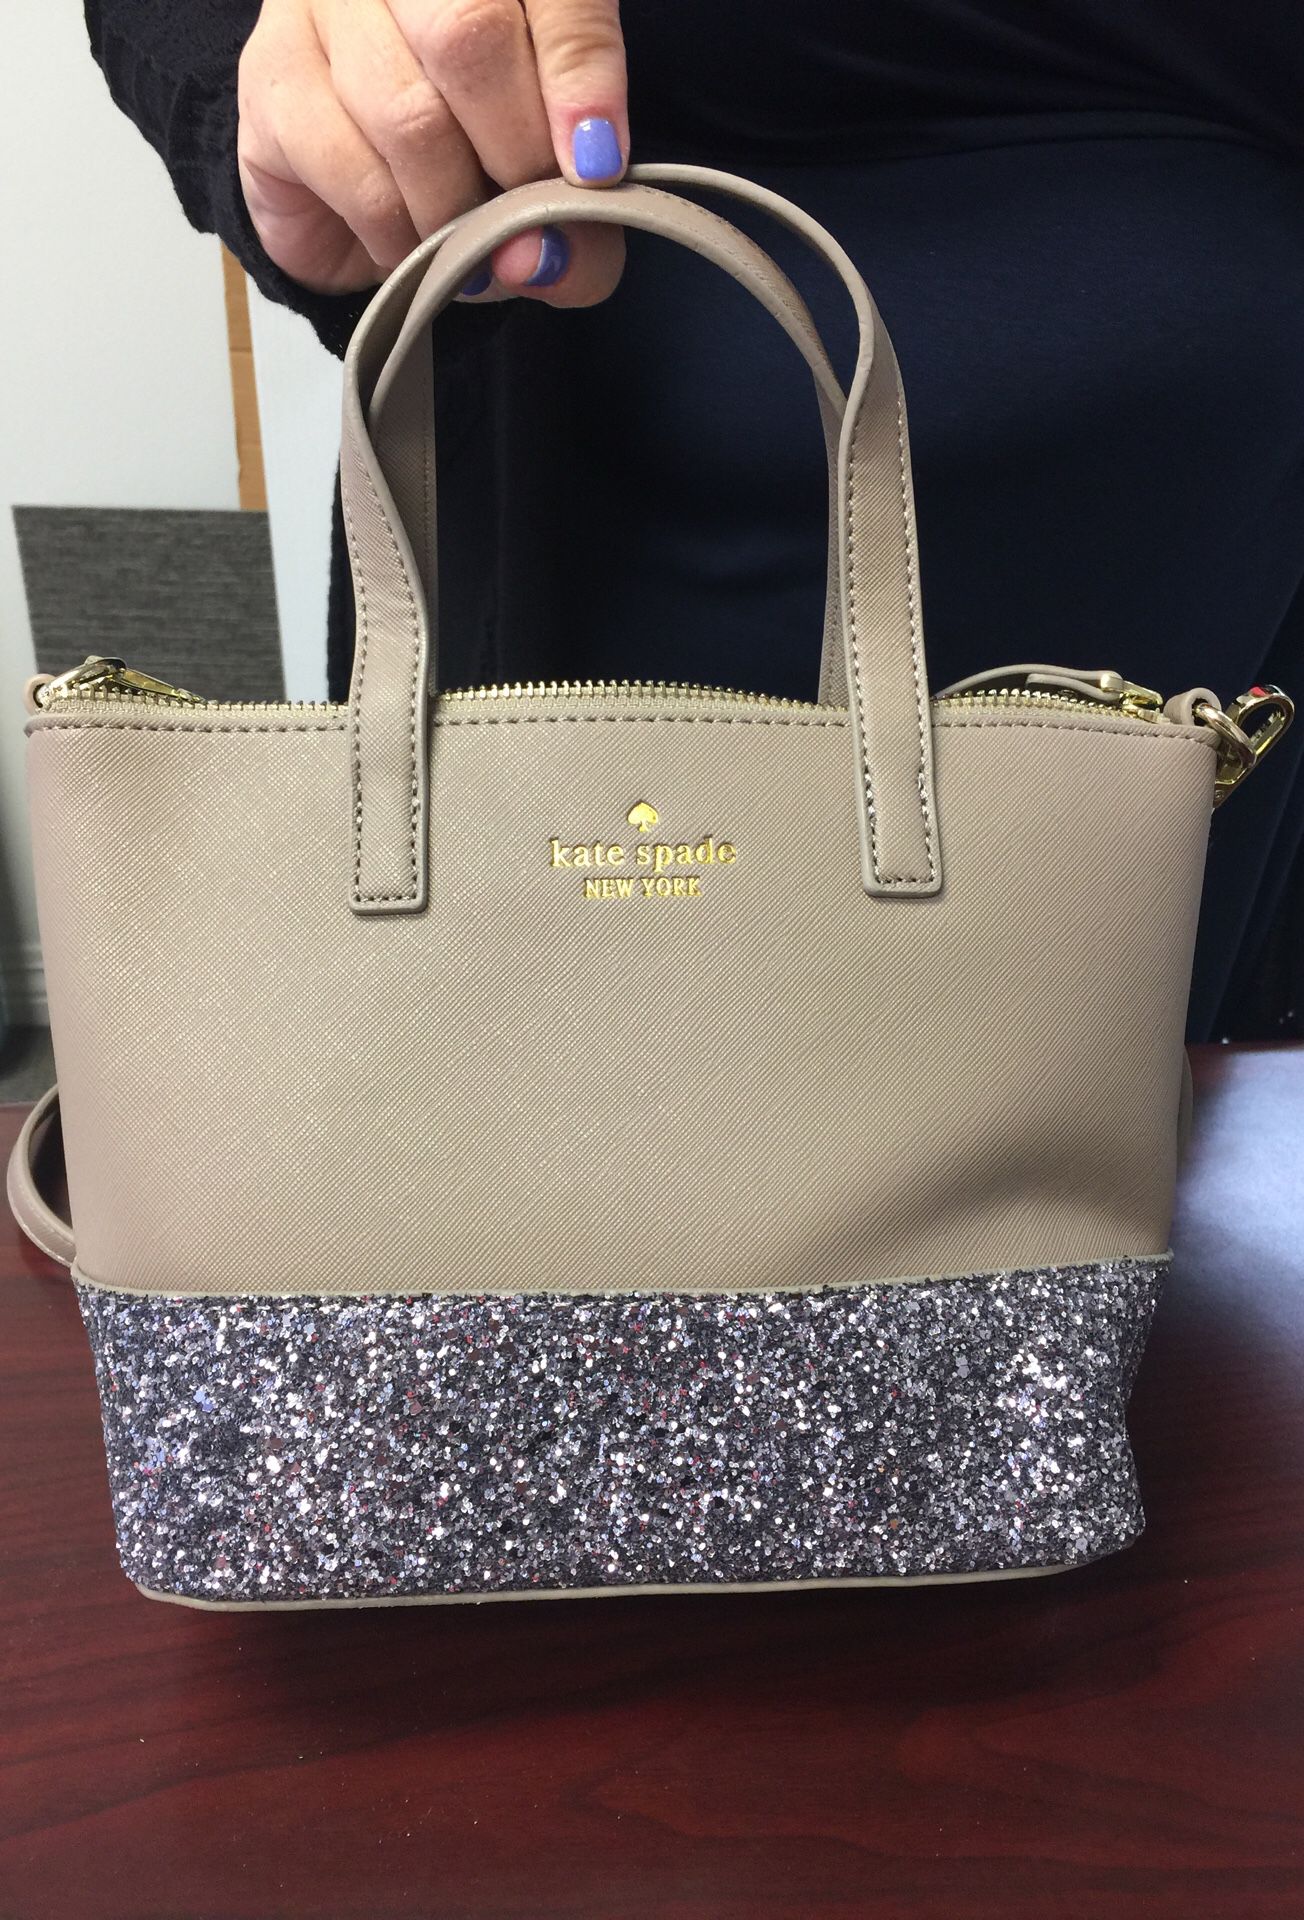 Brand new - never used Kate Spade purse